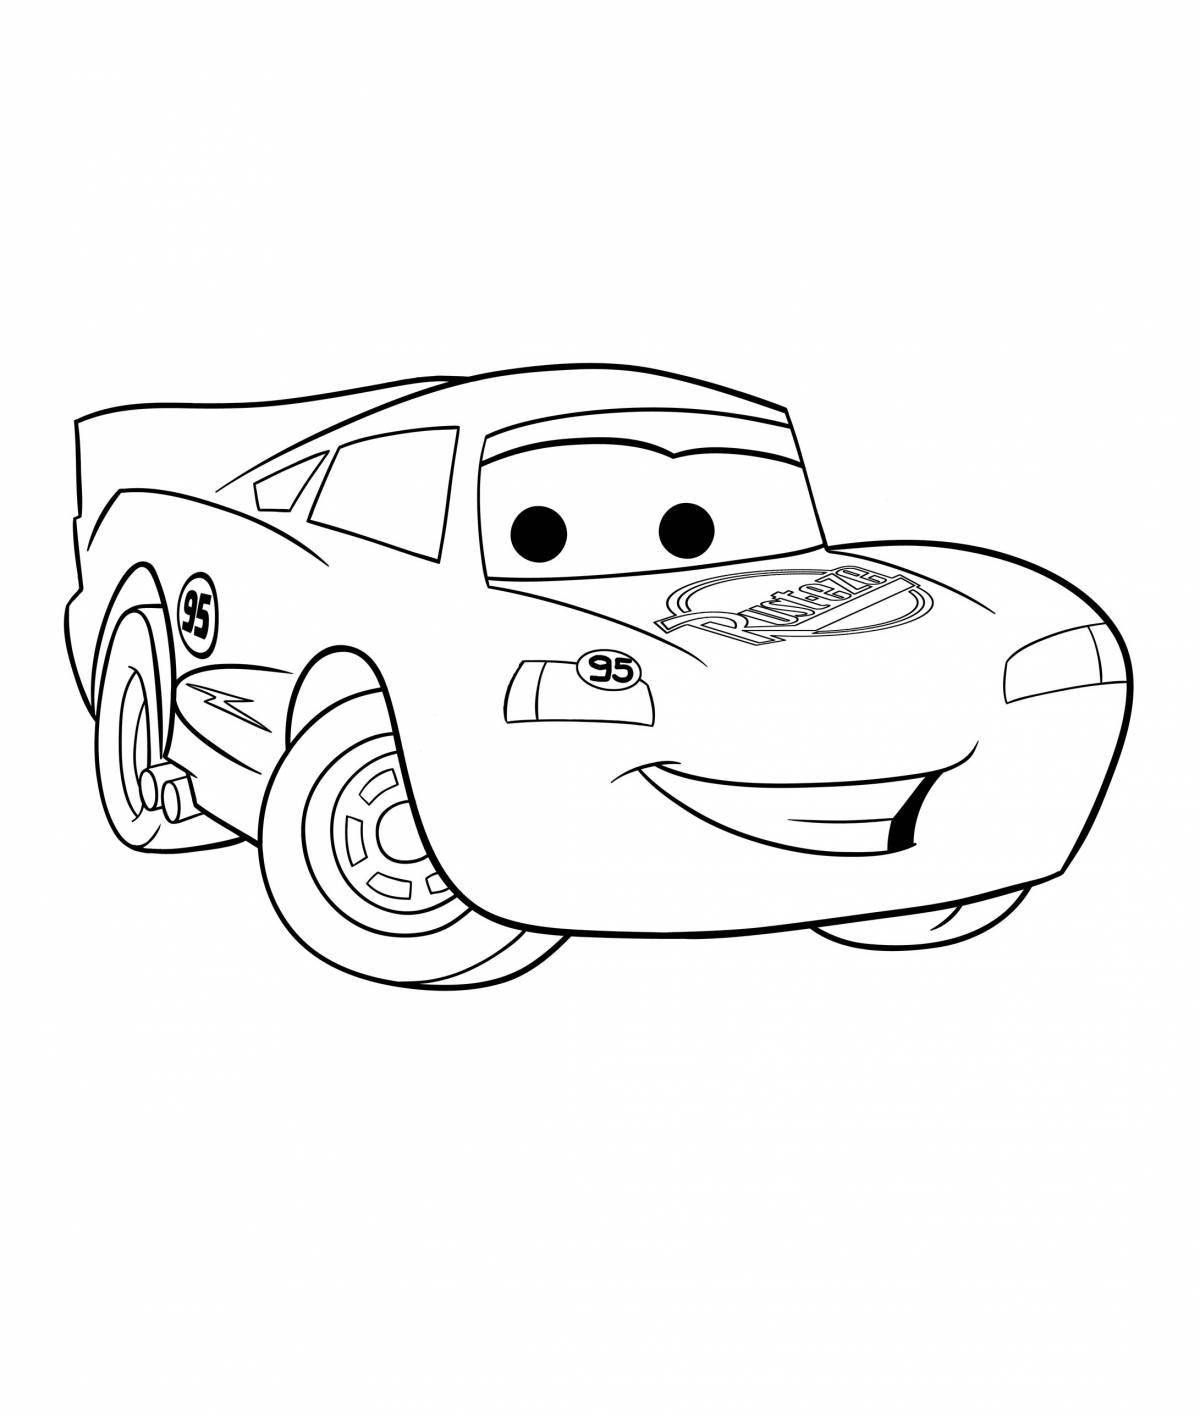 Gorgeous cars coloring book for boys